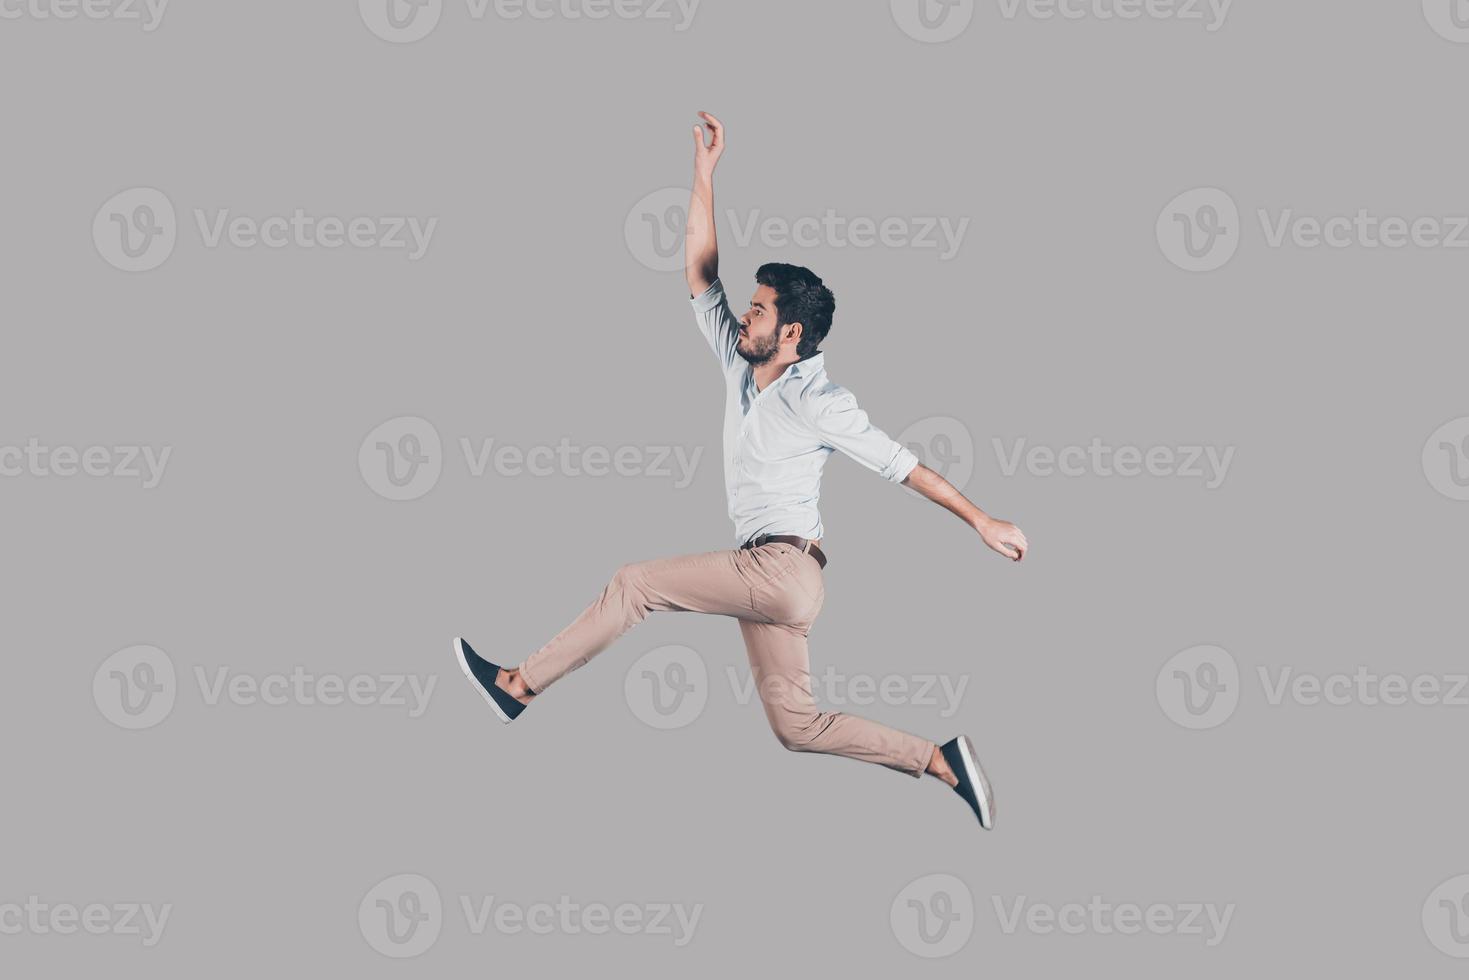 Free jumping. Mid-air shot of handsome young man jumping and gesturing against background photo